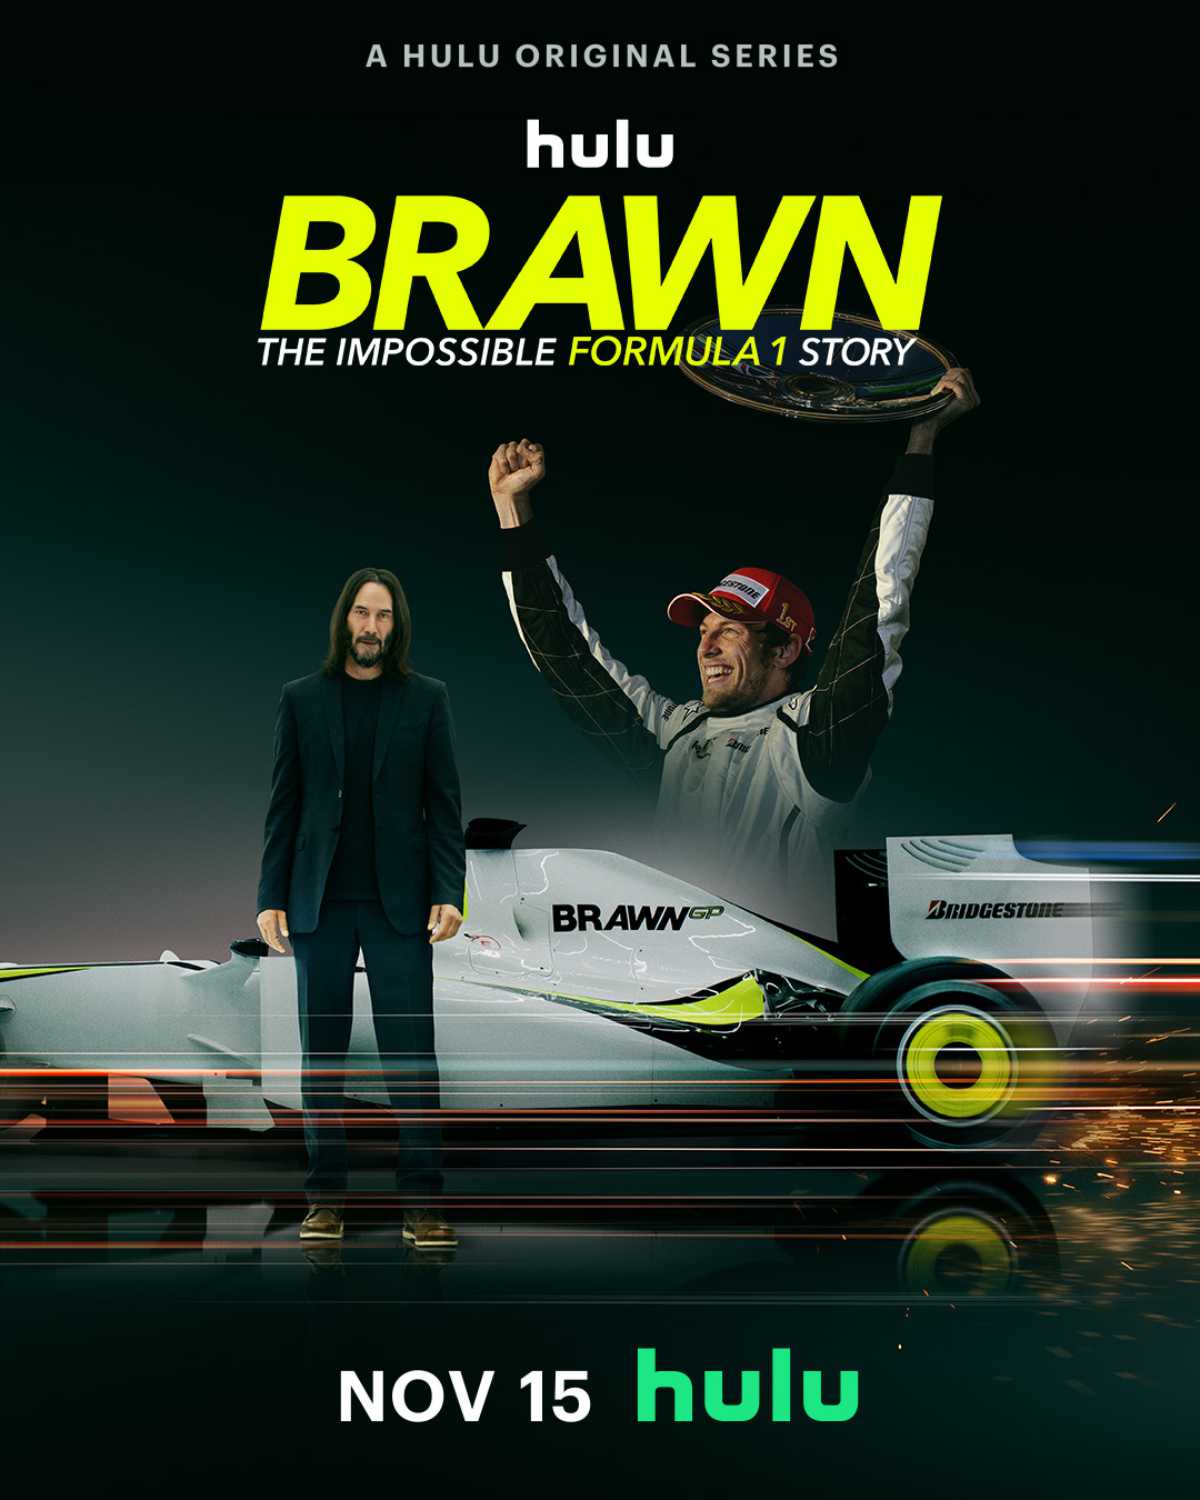 Brawn: The Impossible Formula 1 Story Trailer with Keanu Reeves